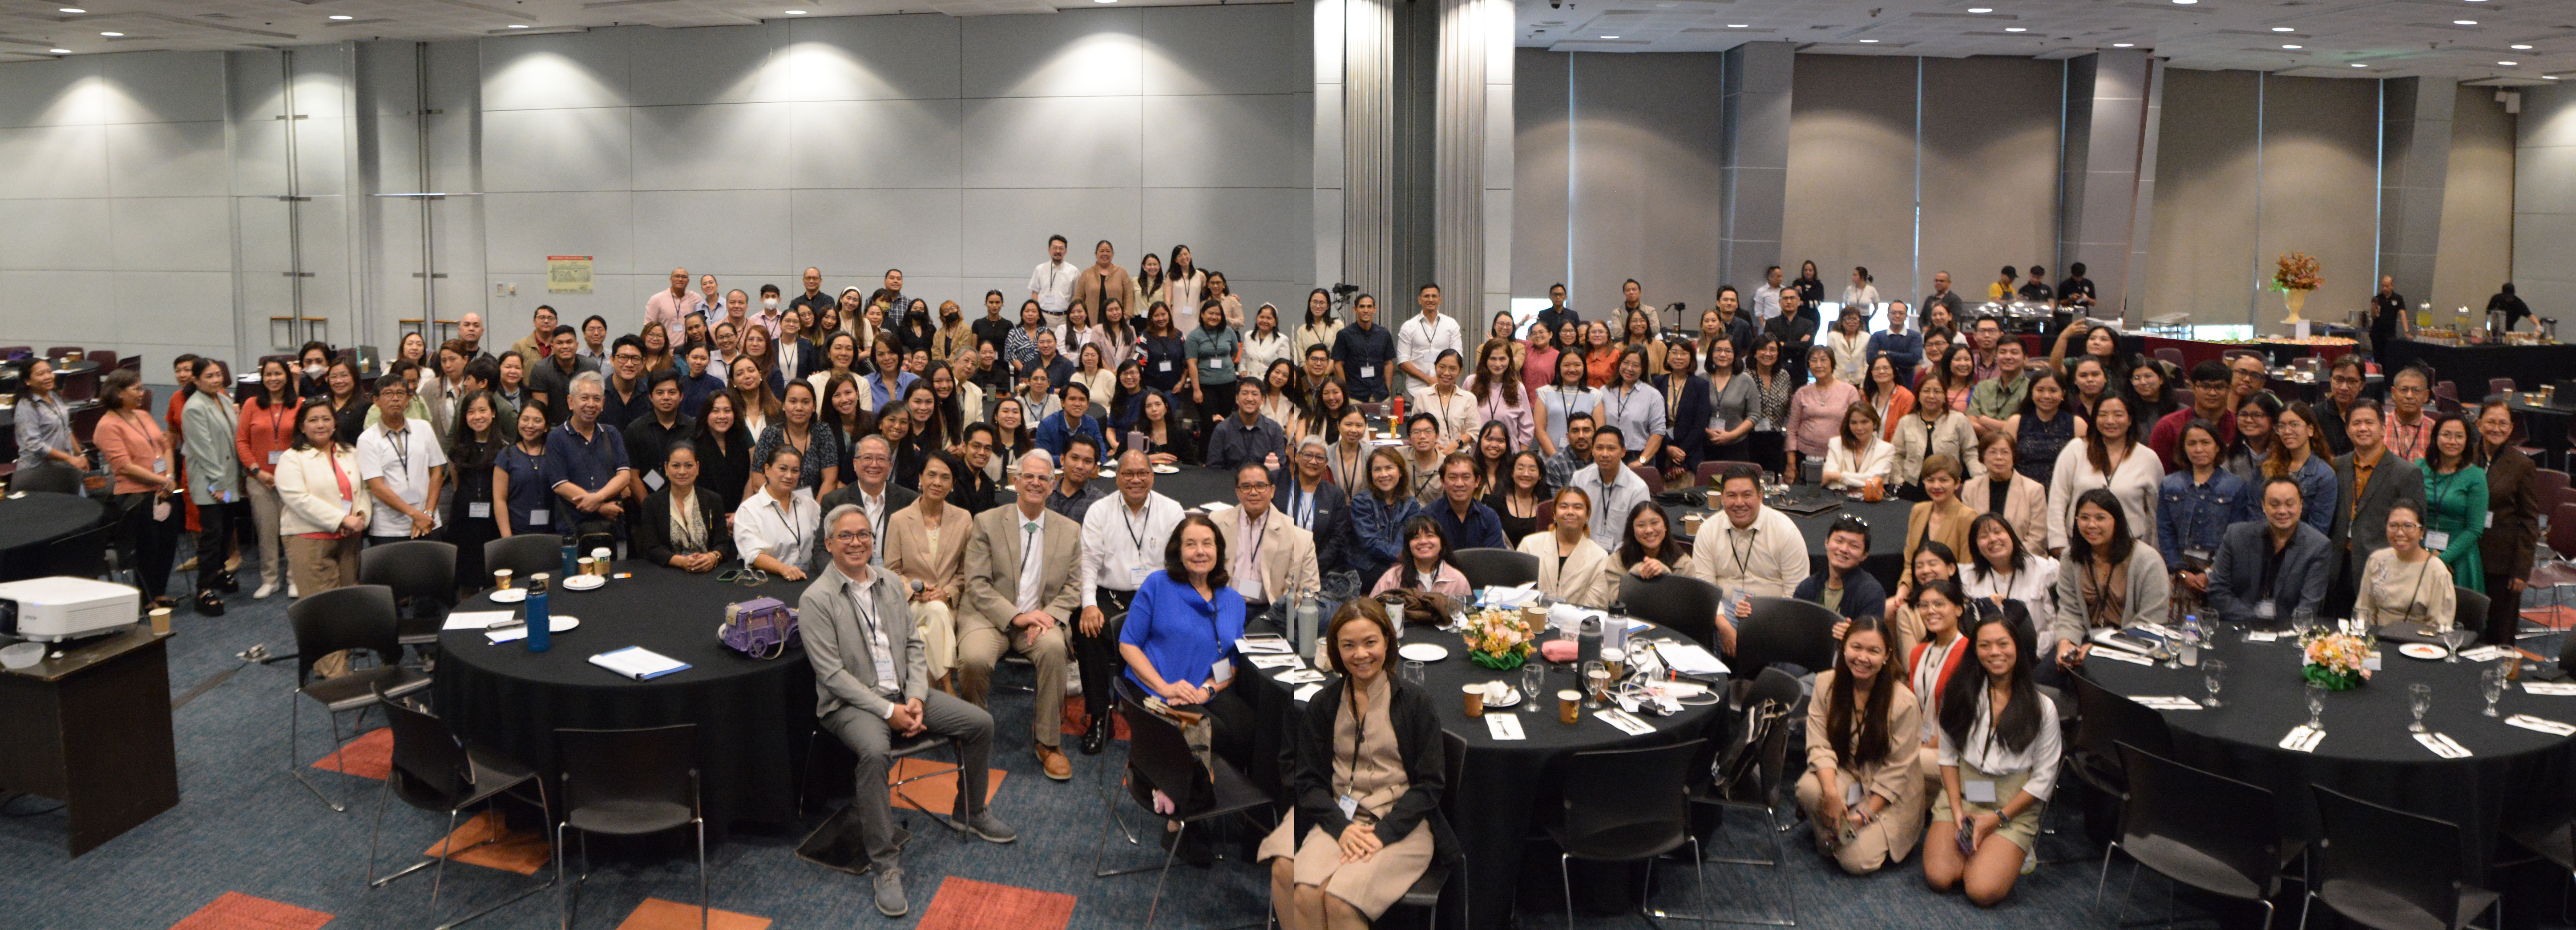  Featured image for article title Ateneo School of Medicine and Public Health Hosts Inaugural Asian Functional Medicine Conference